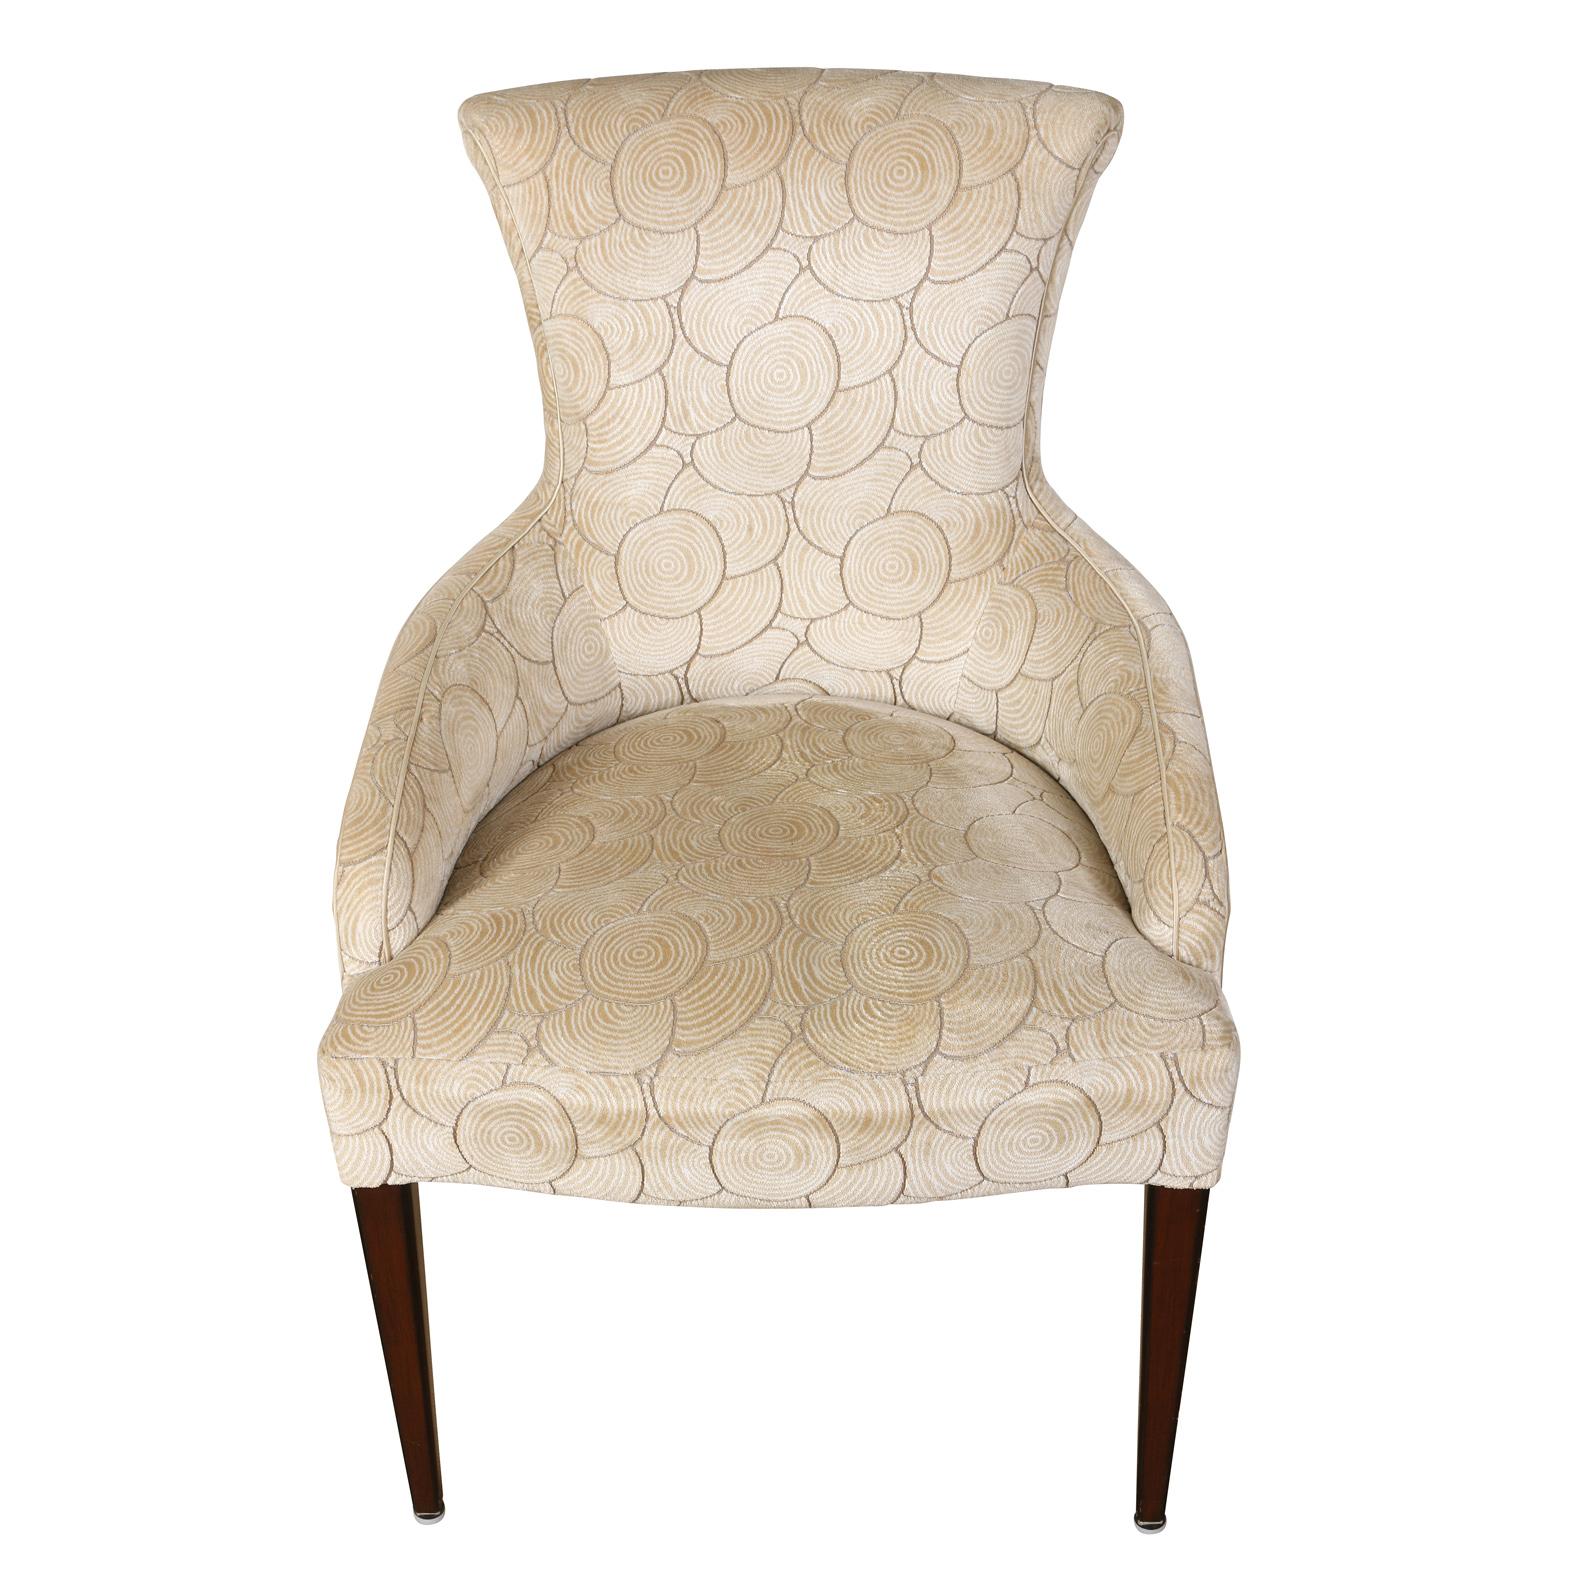 A vintage pair of contemporary shaped chairs upholstered in modern cream colored velvet with a geometric velvet circular design on wood legs.